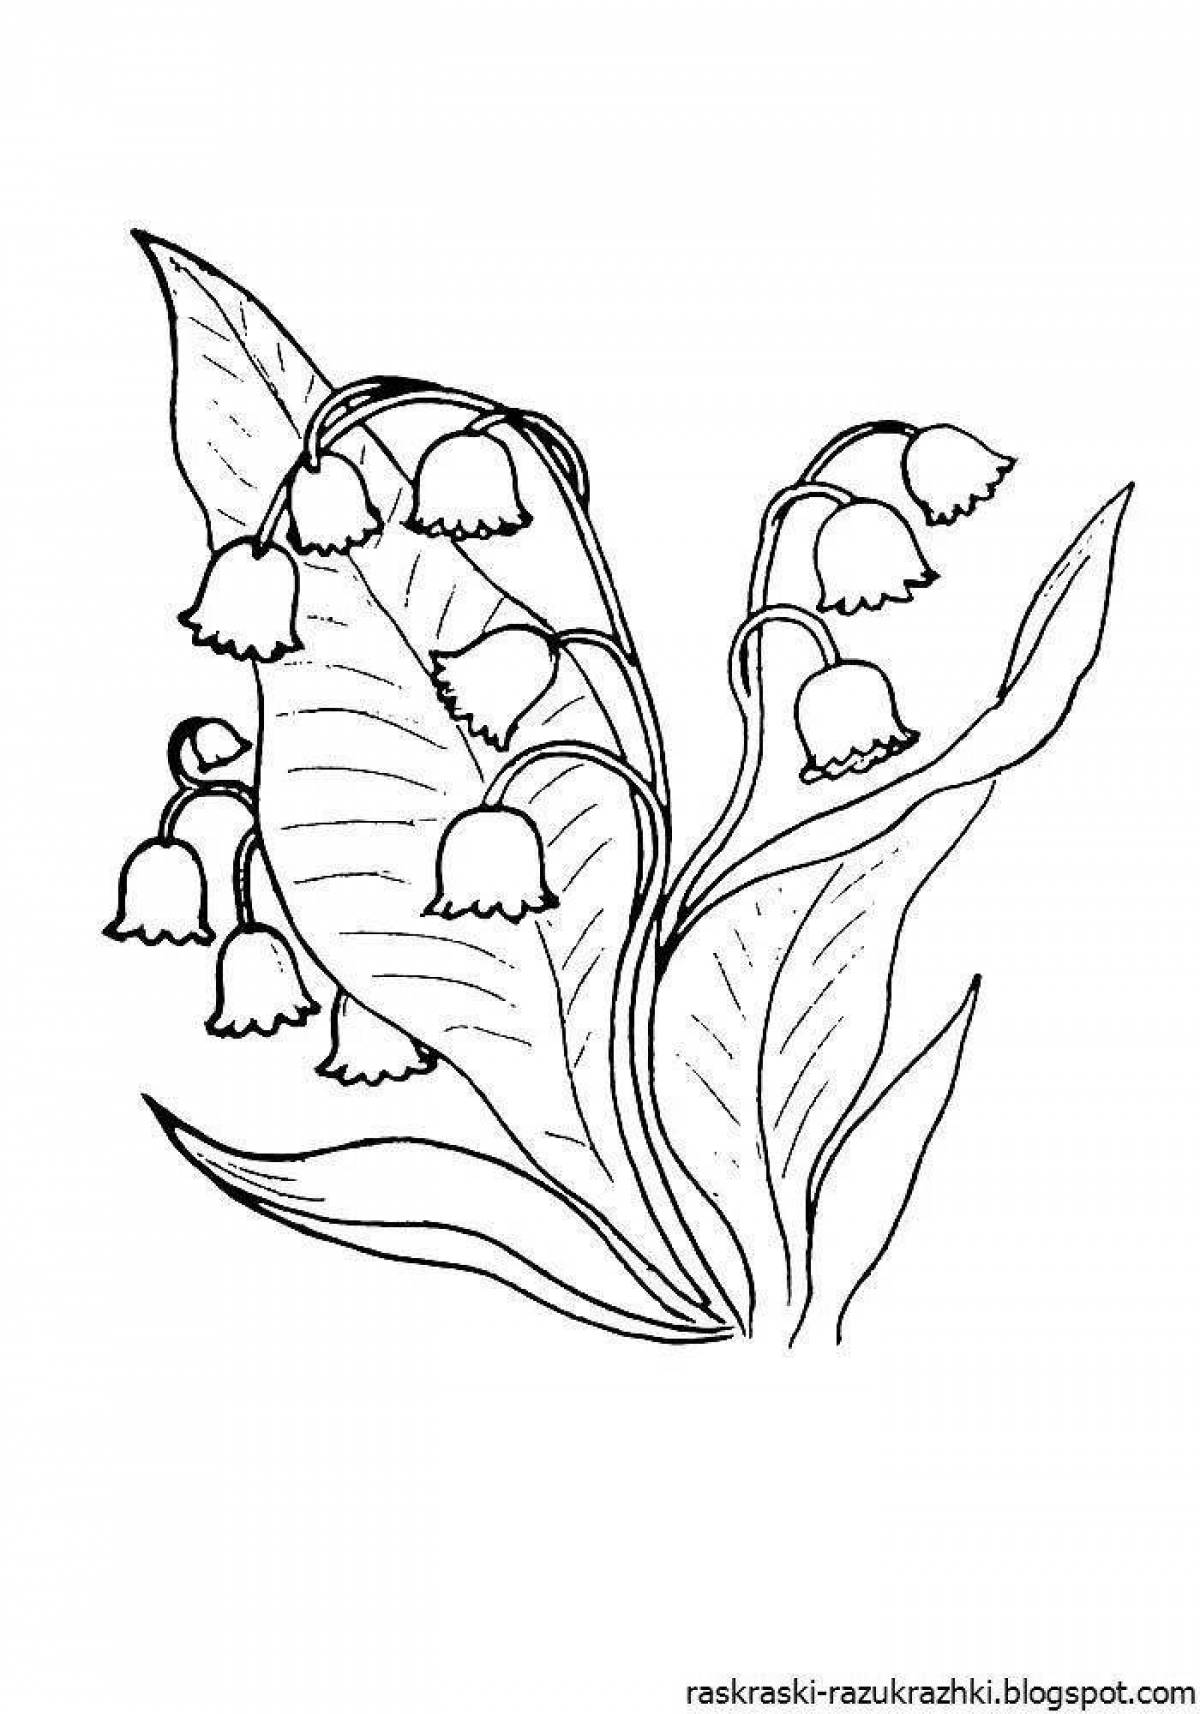 A fun lily of the valley coloring book for kids